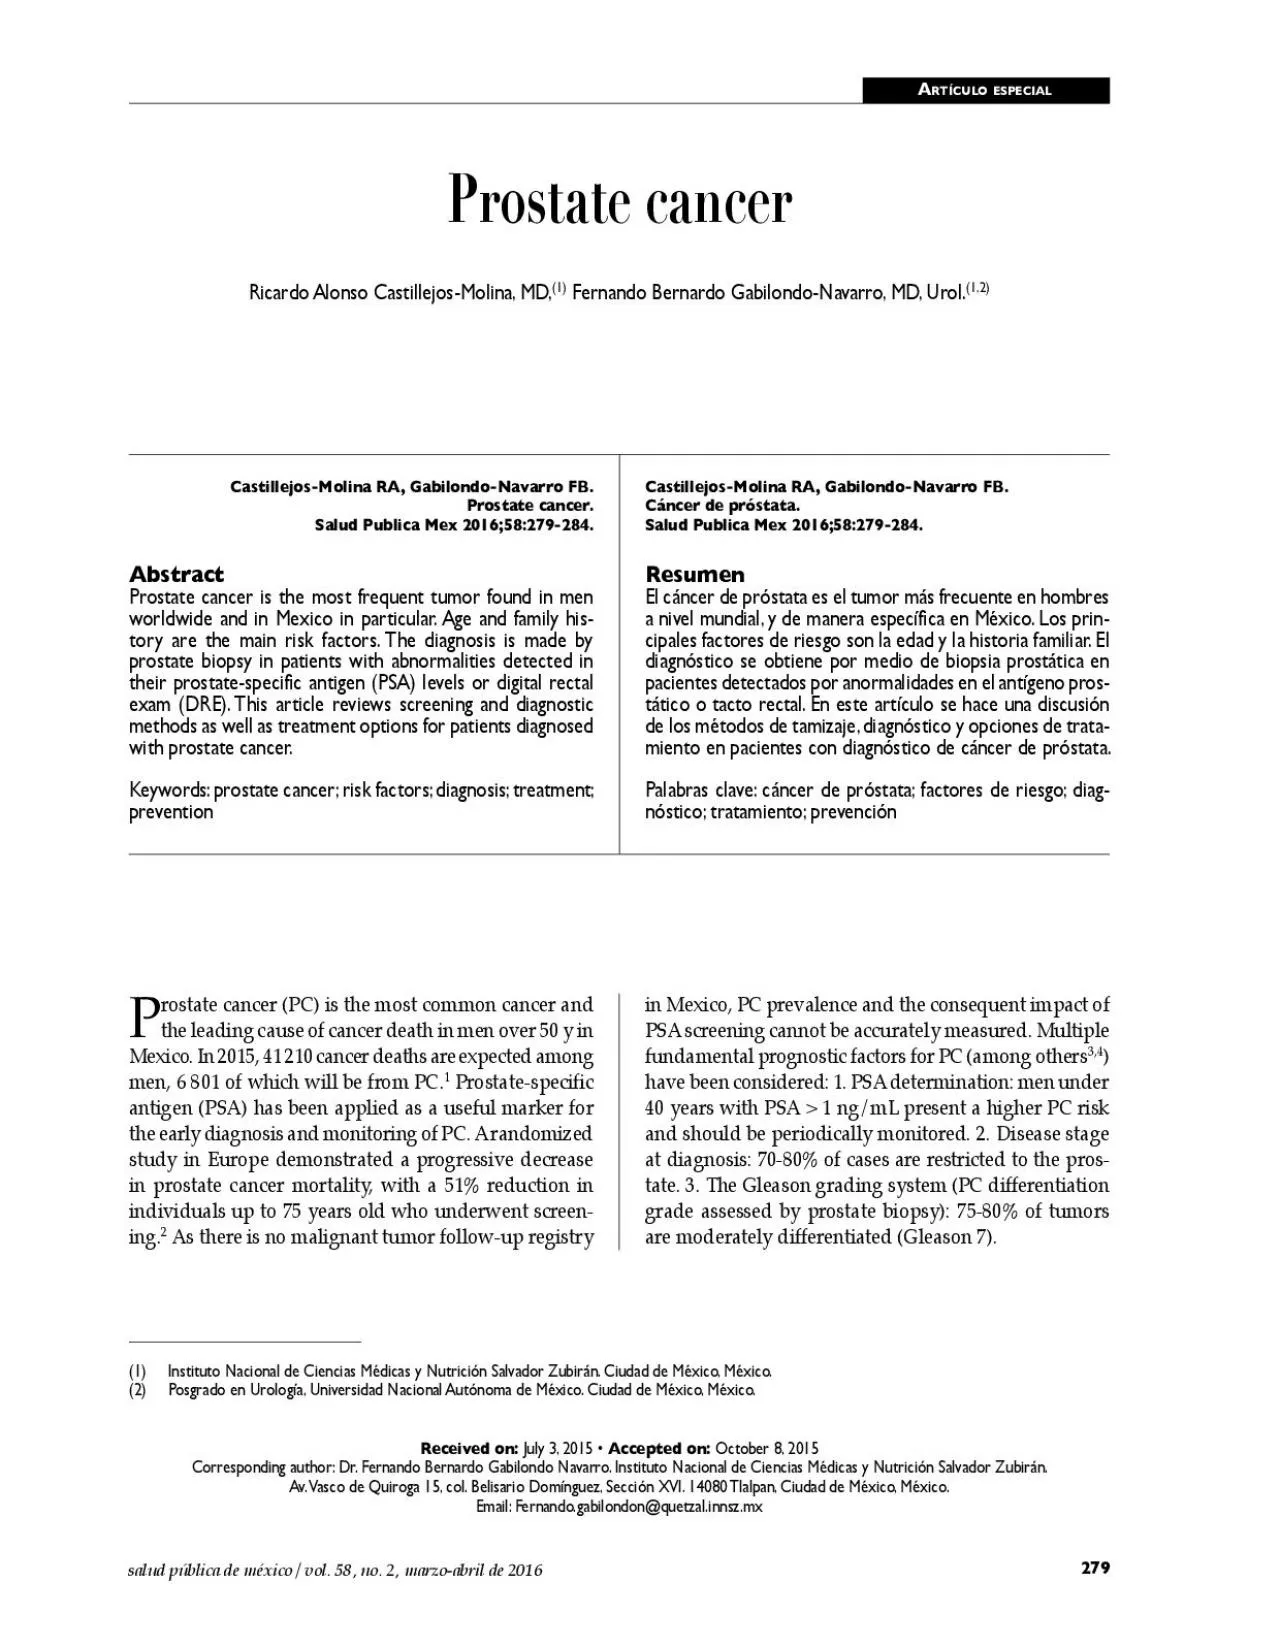 rostate cancer PC is the most common cancer and the leading cause of